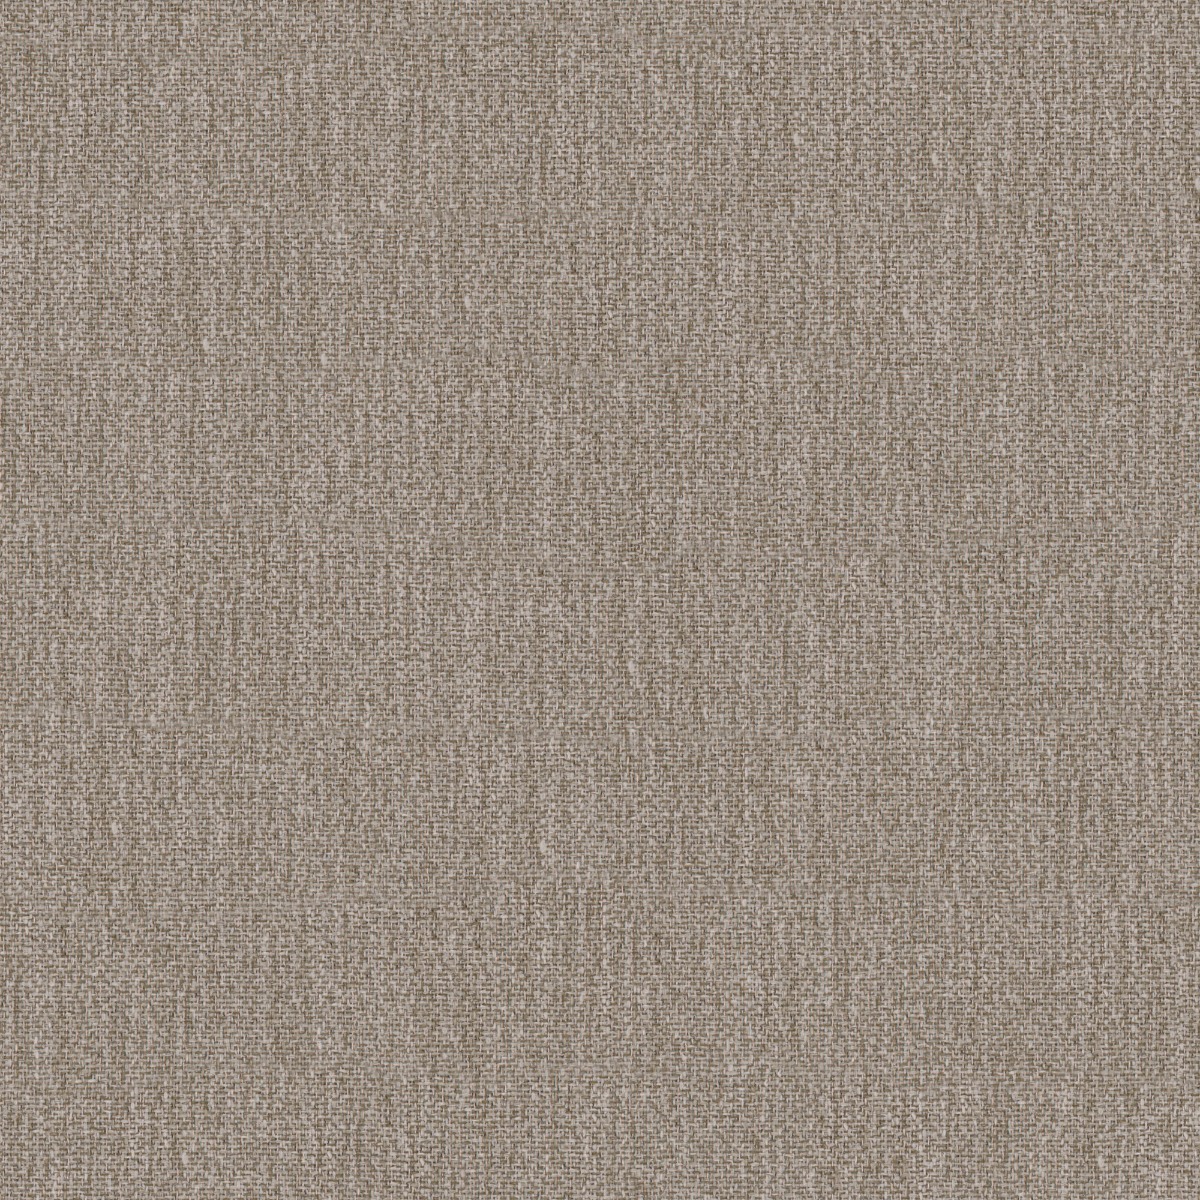 A seamless fabric texture with plain natural dimout units arranged in a None pattern